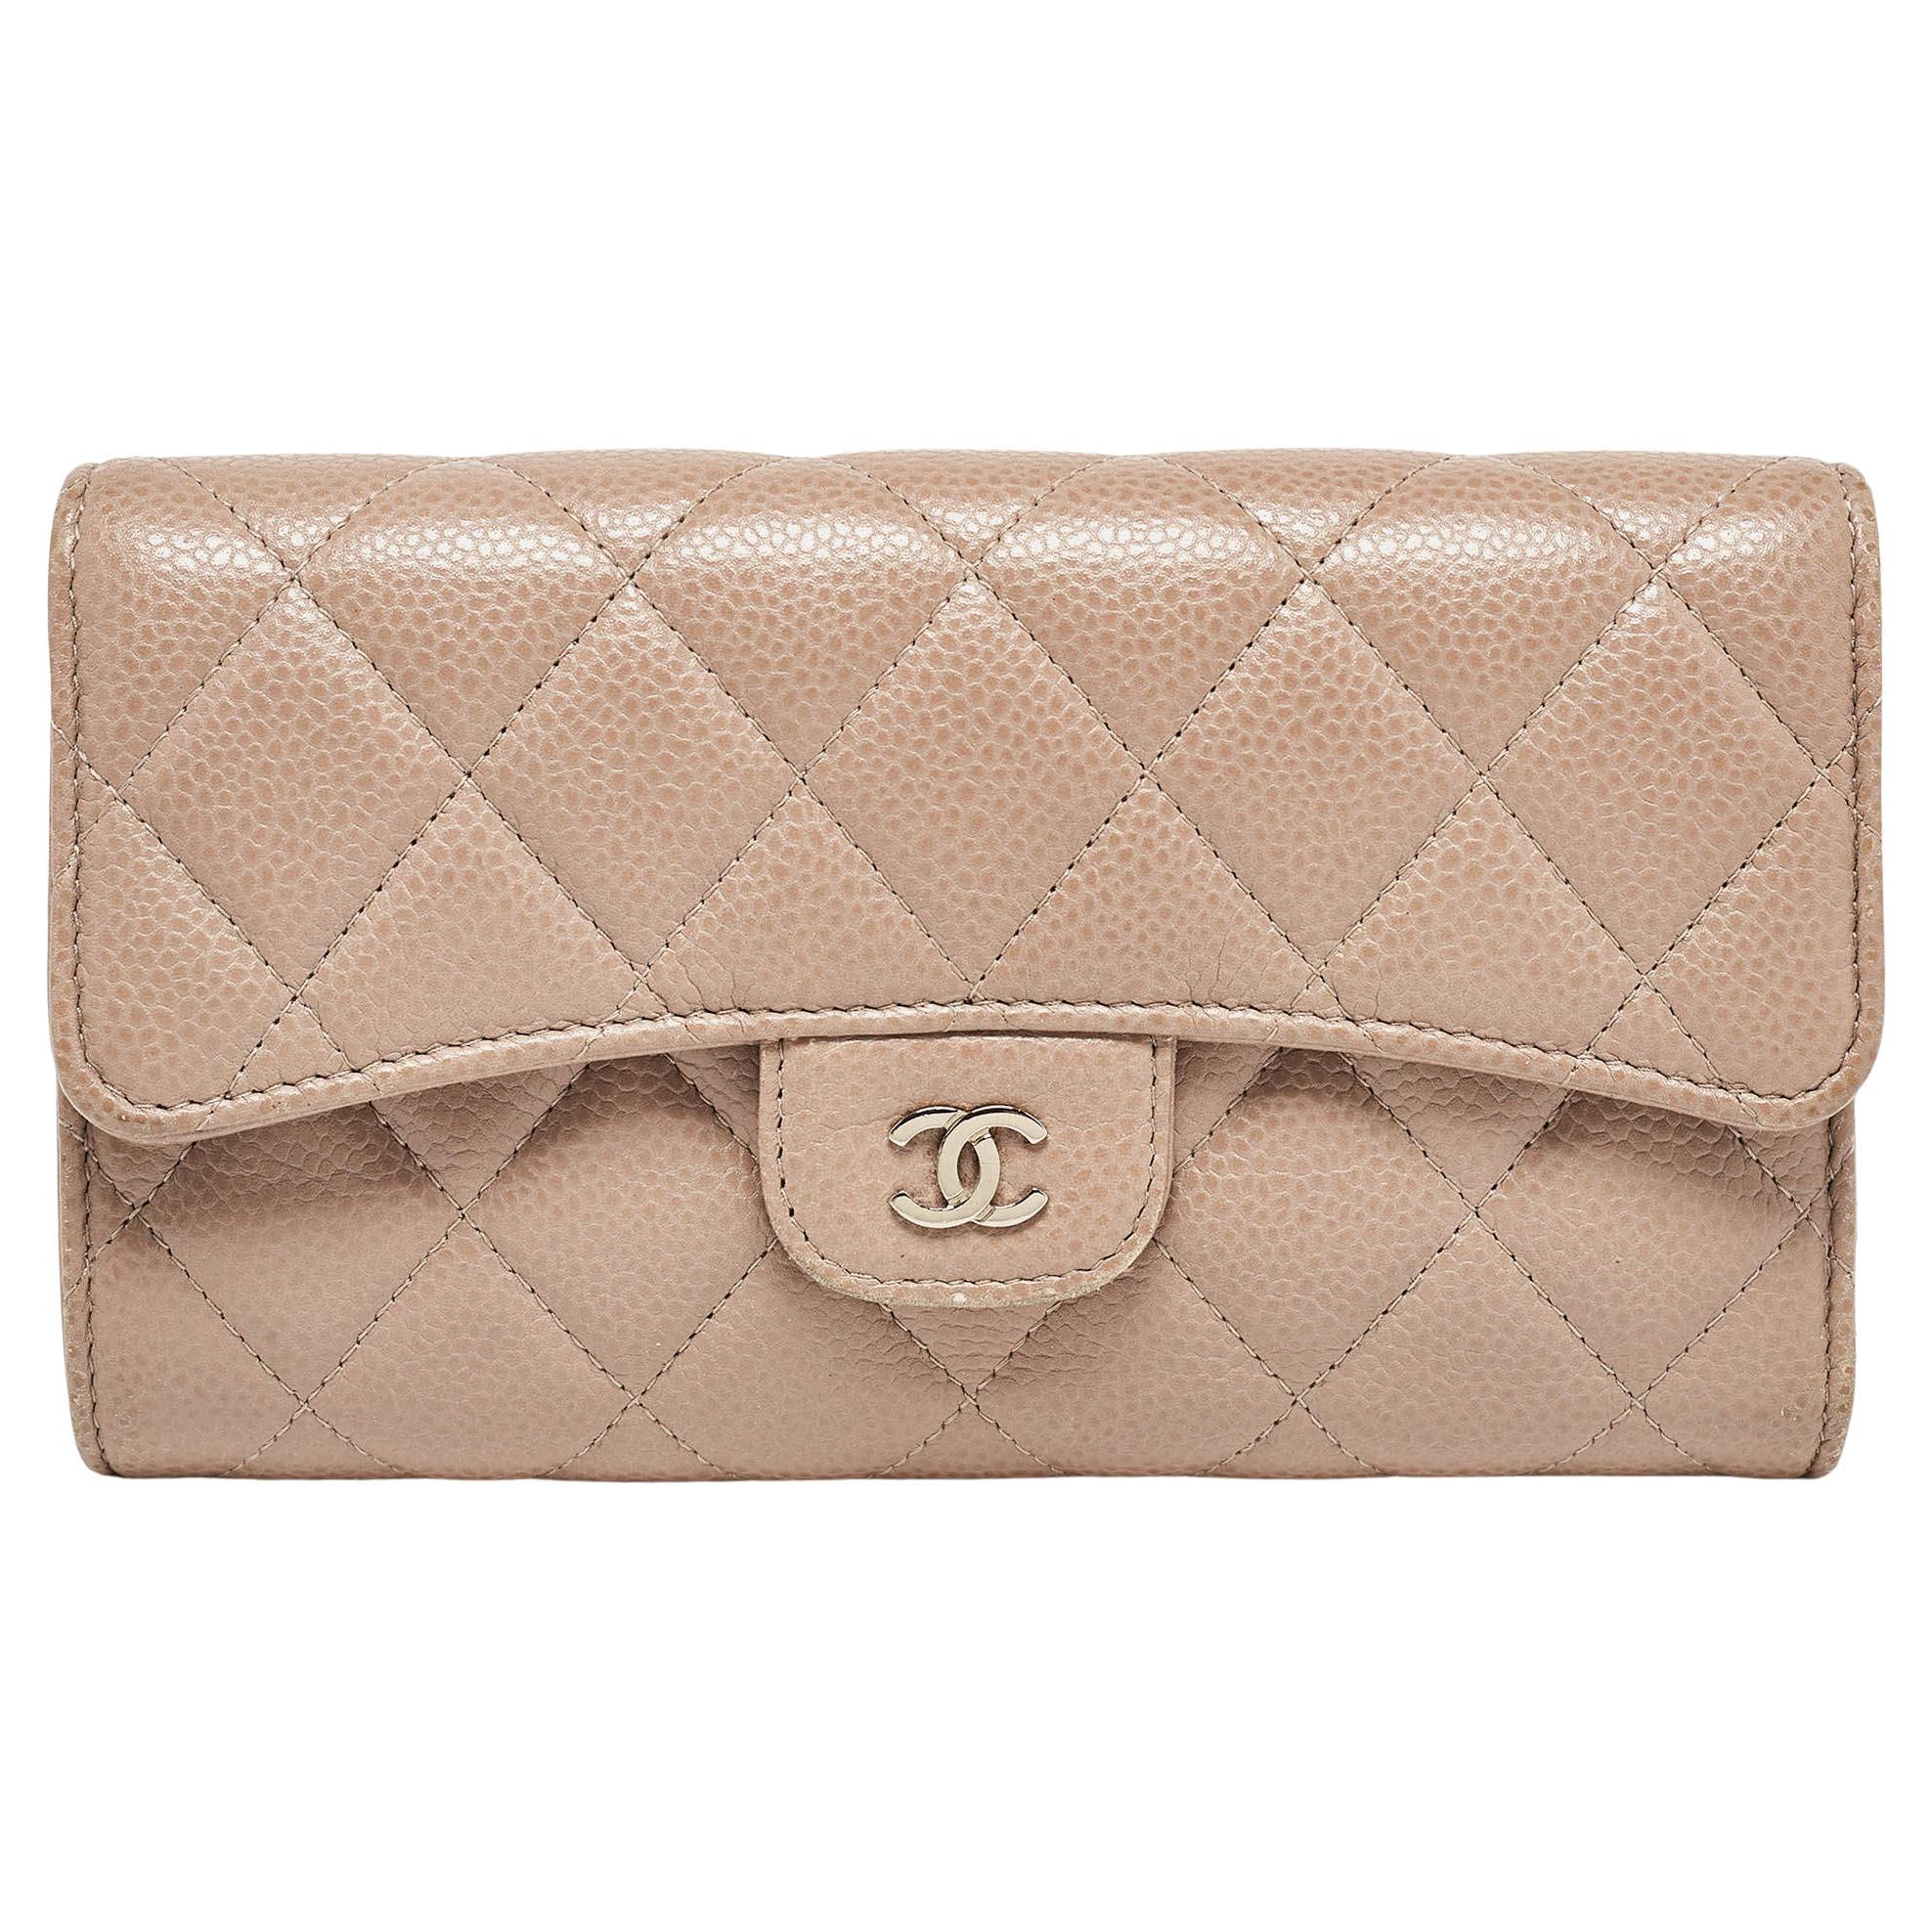 Chanel Beige Quilted Caviar Leather CC Trifold Continental Wallet